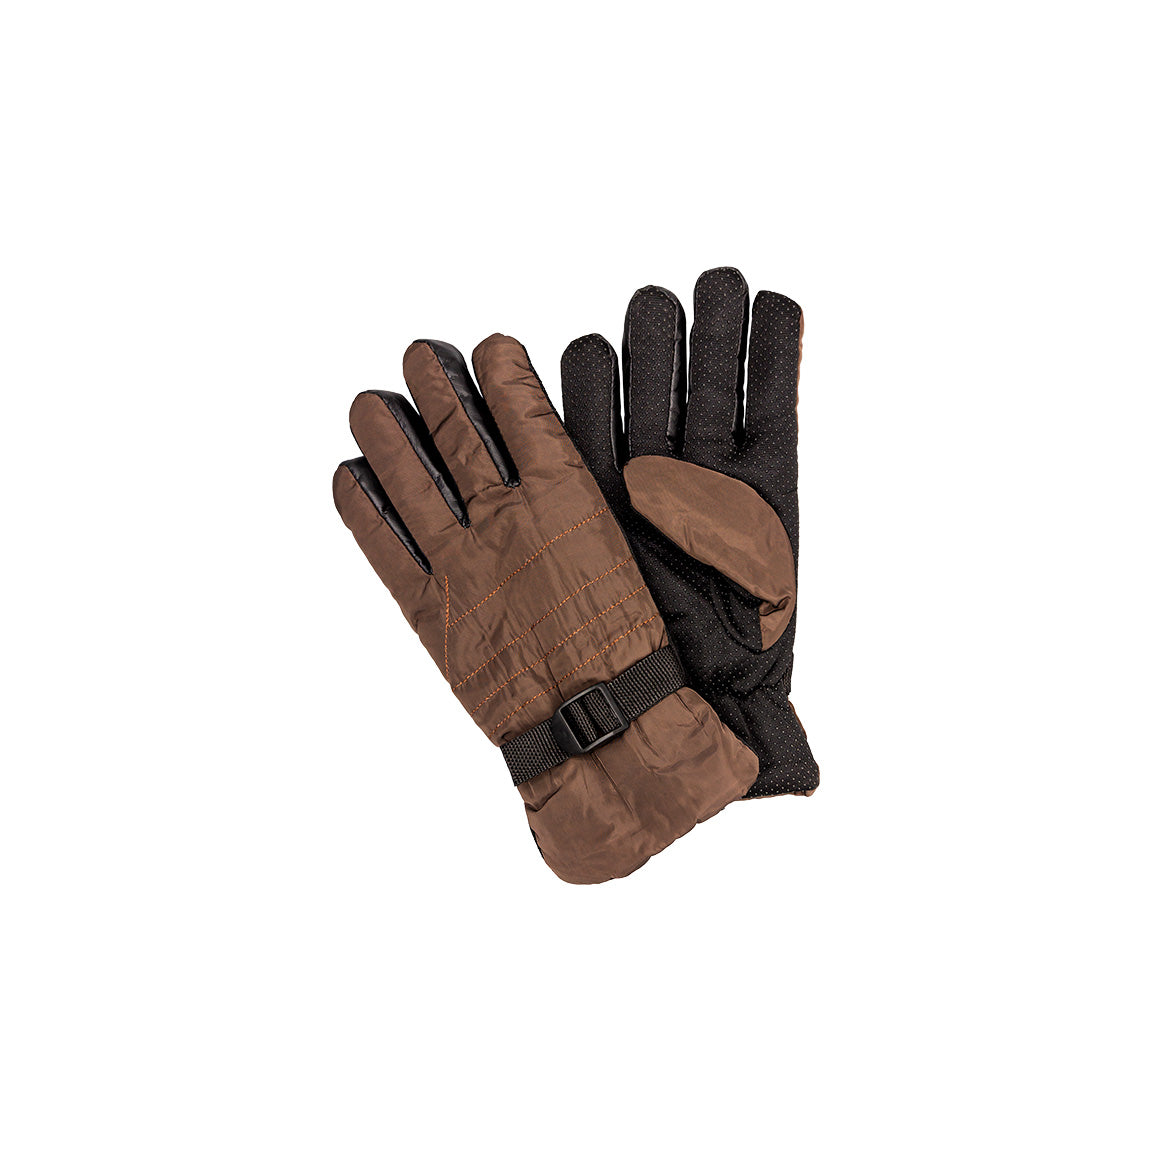 These are brown insulated gloves with quilted stitching on the back, a textured grip design on the palms and fingers, and a wrist strap for a snug fit.